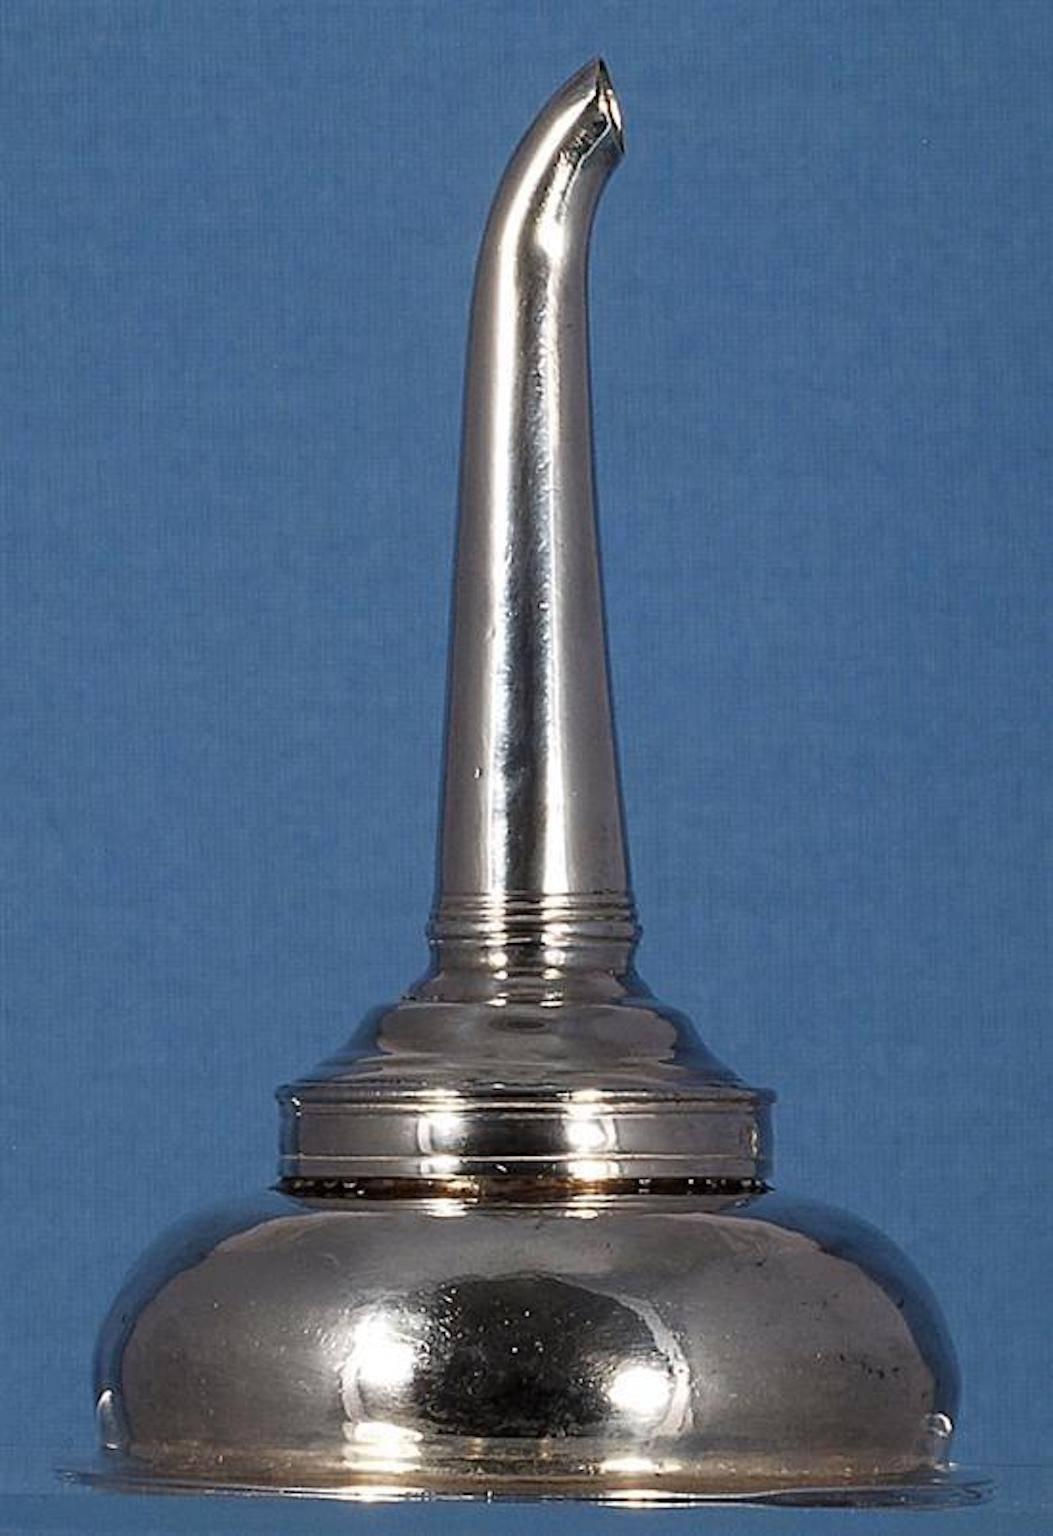 A George III silver wine funnel, by Hester Bateman, London, circa 1780, lacking muslin ring, Height 124mm Weight 1.9oz/62grms.